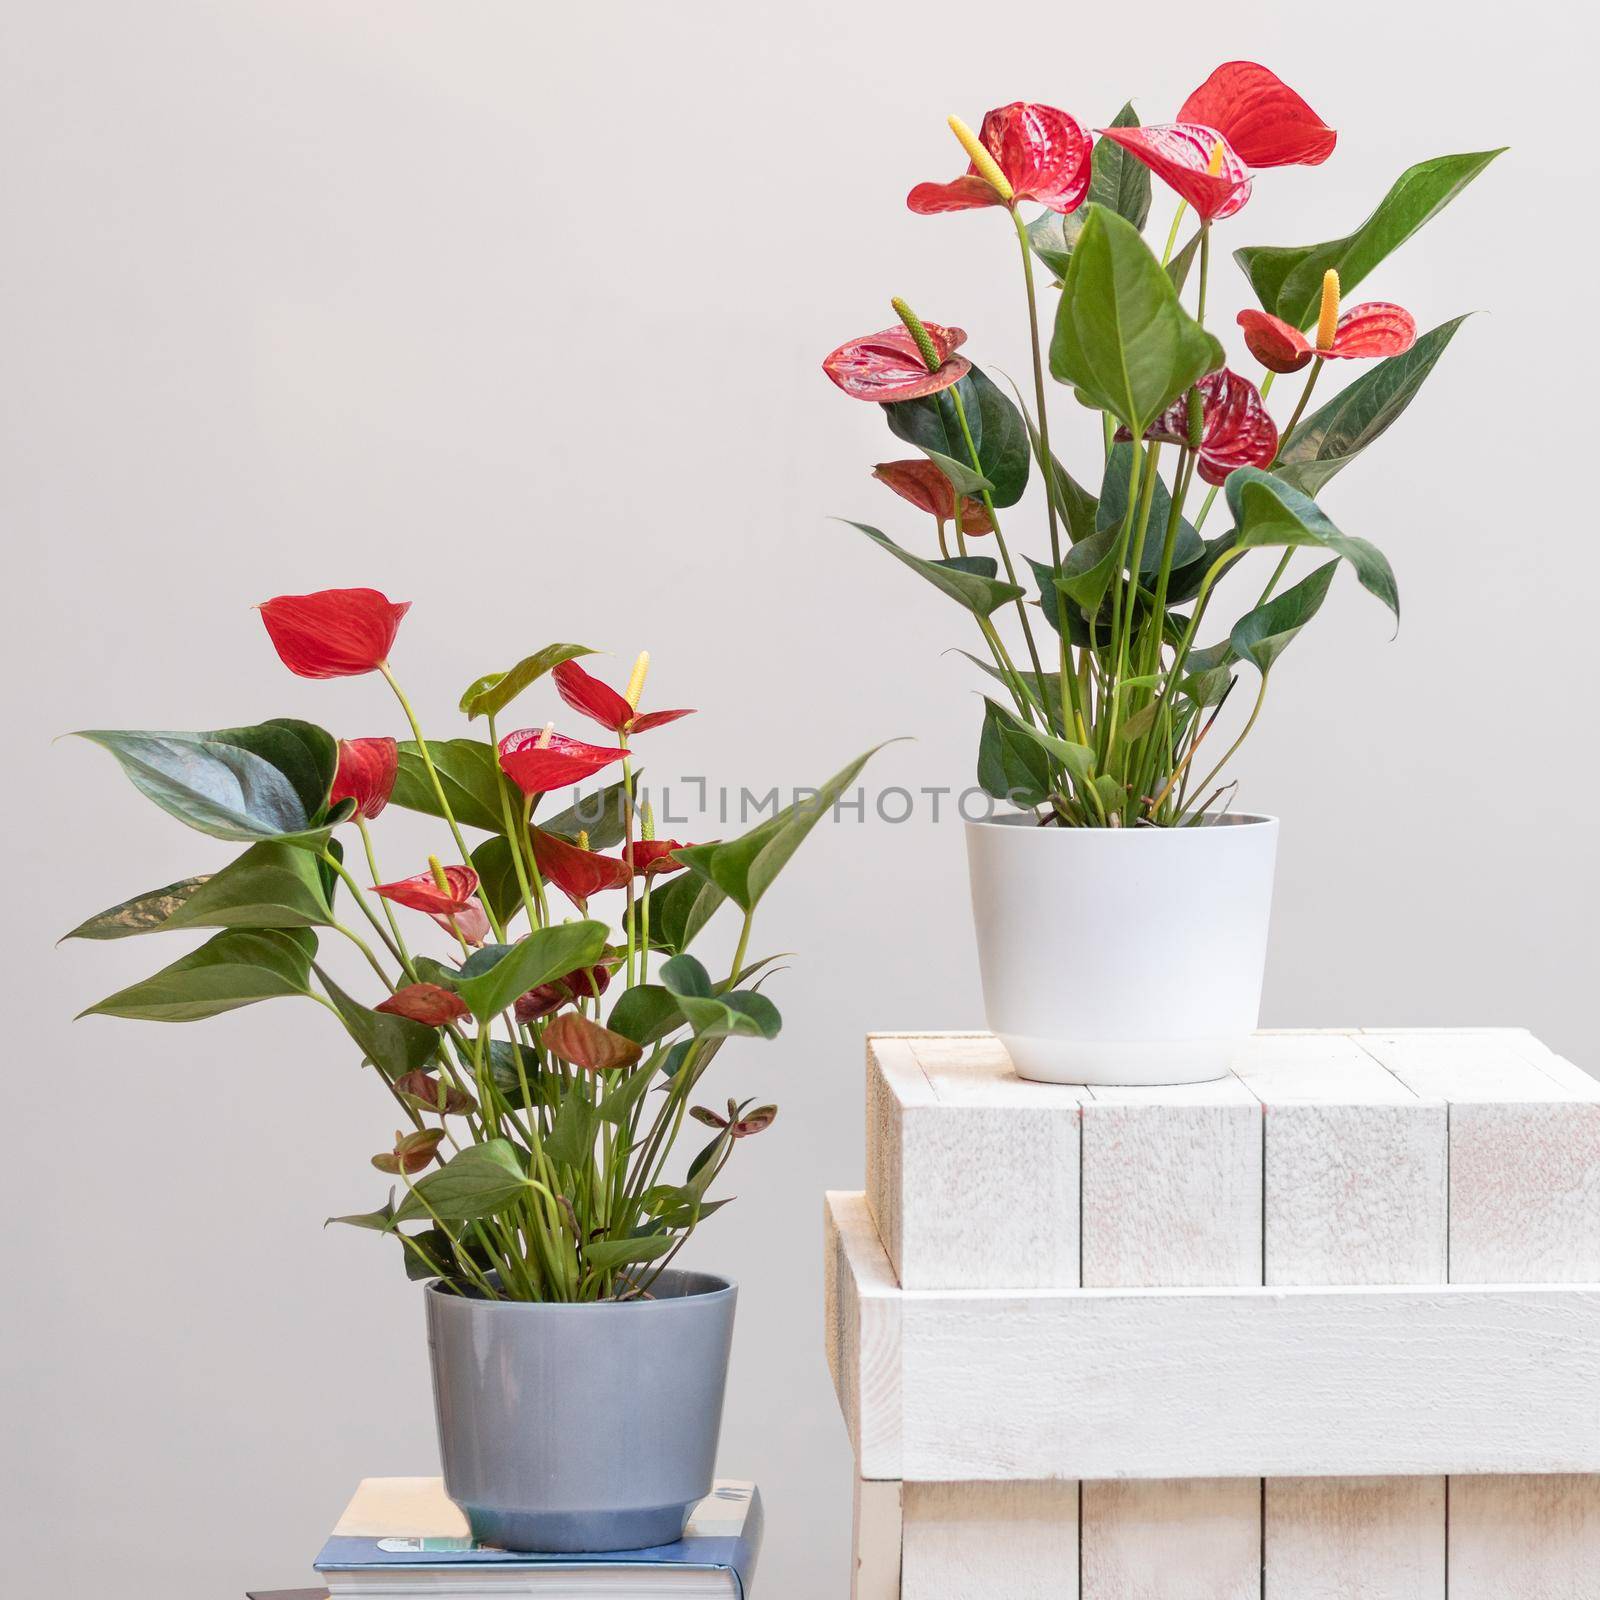 Red Anthurium Laceleaf flower plant in pot by ferhad